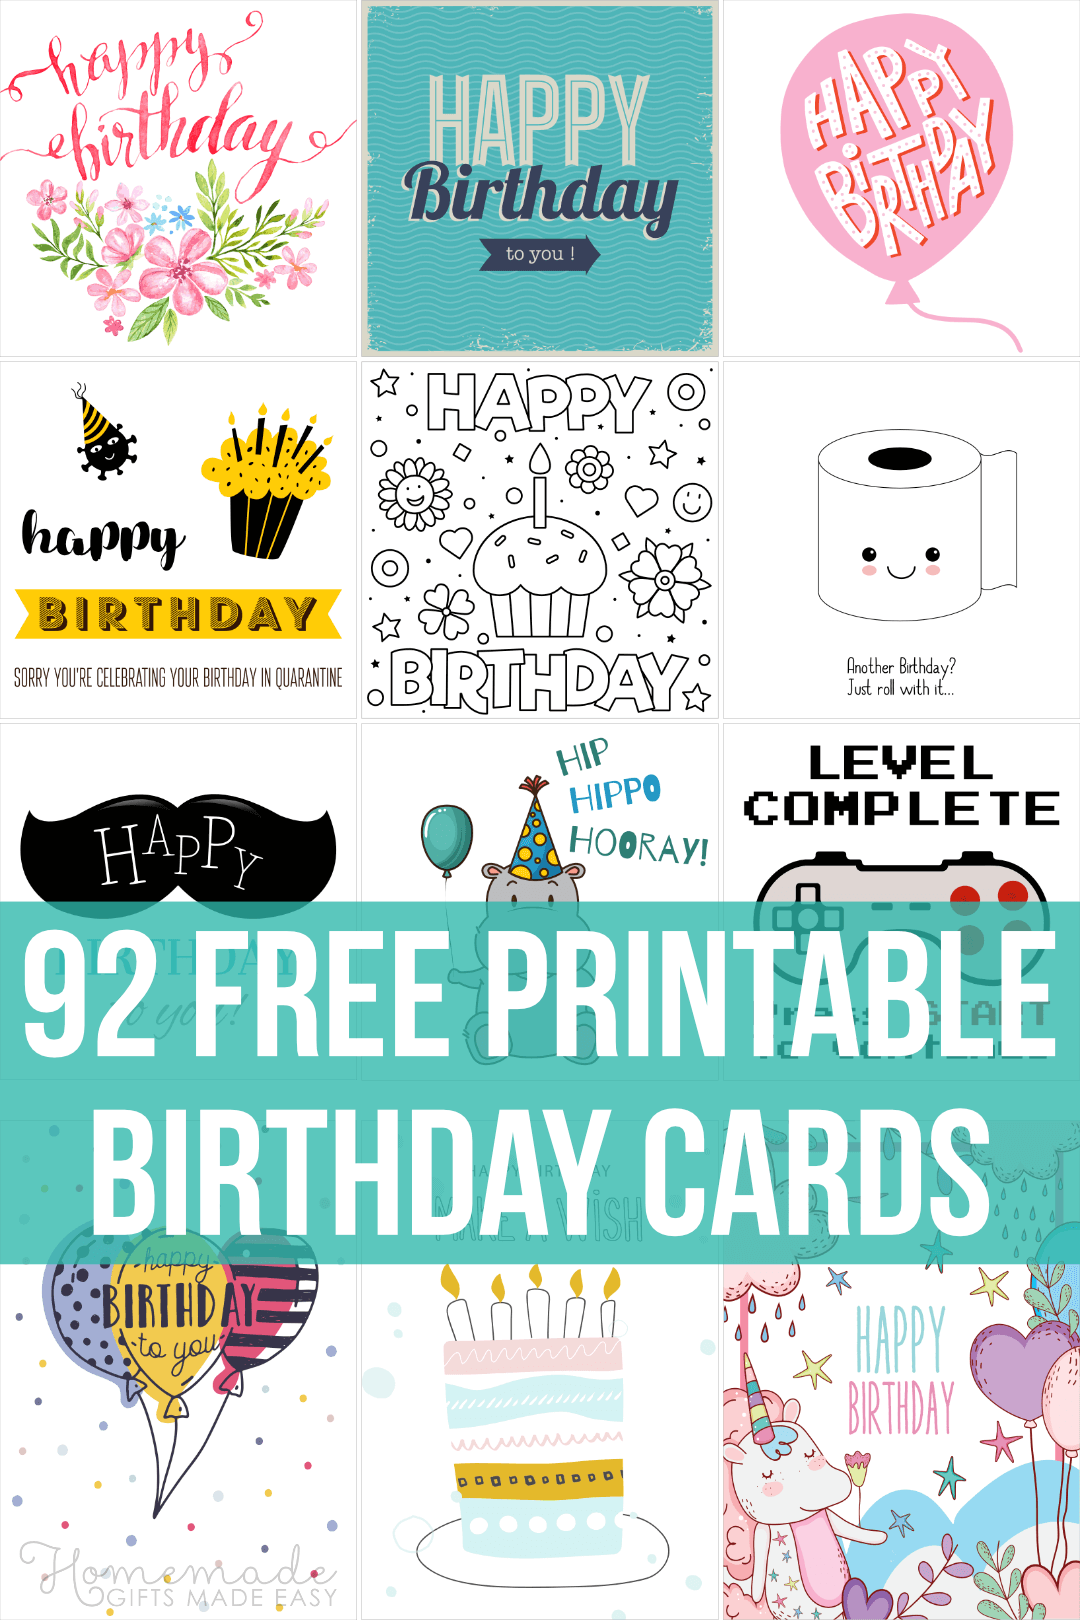 22 Free Printable Birthday Cards For Him, Her, Kids and Adults For Free Templates For Cards Print